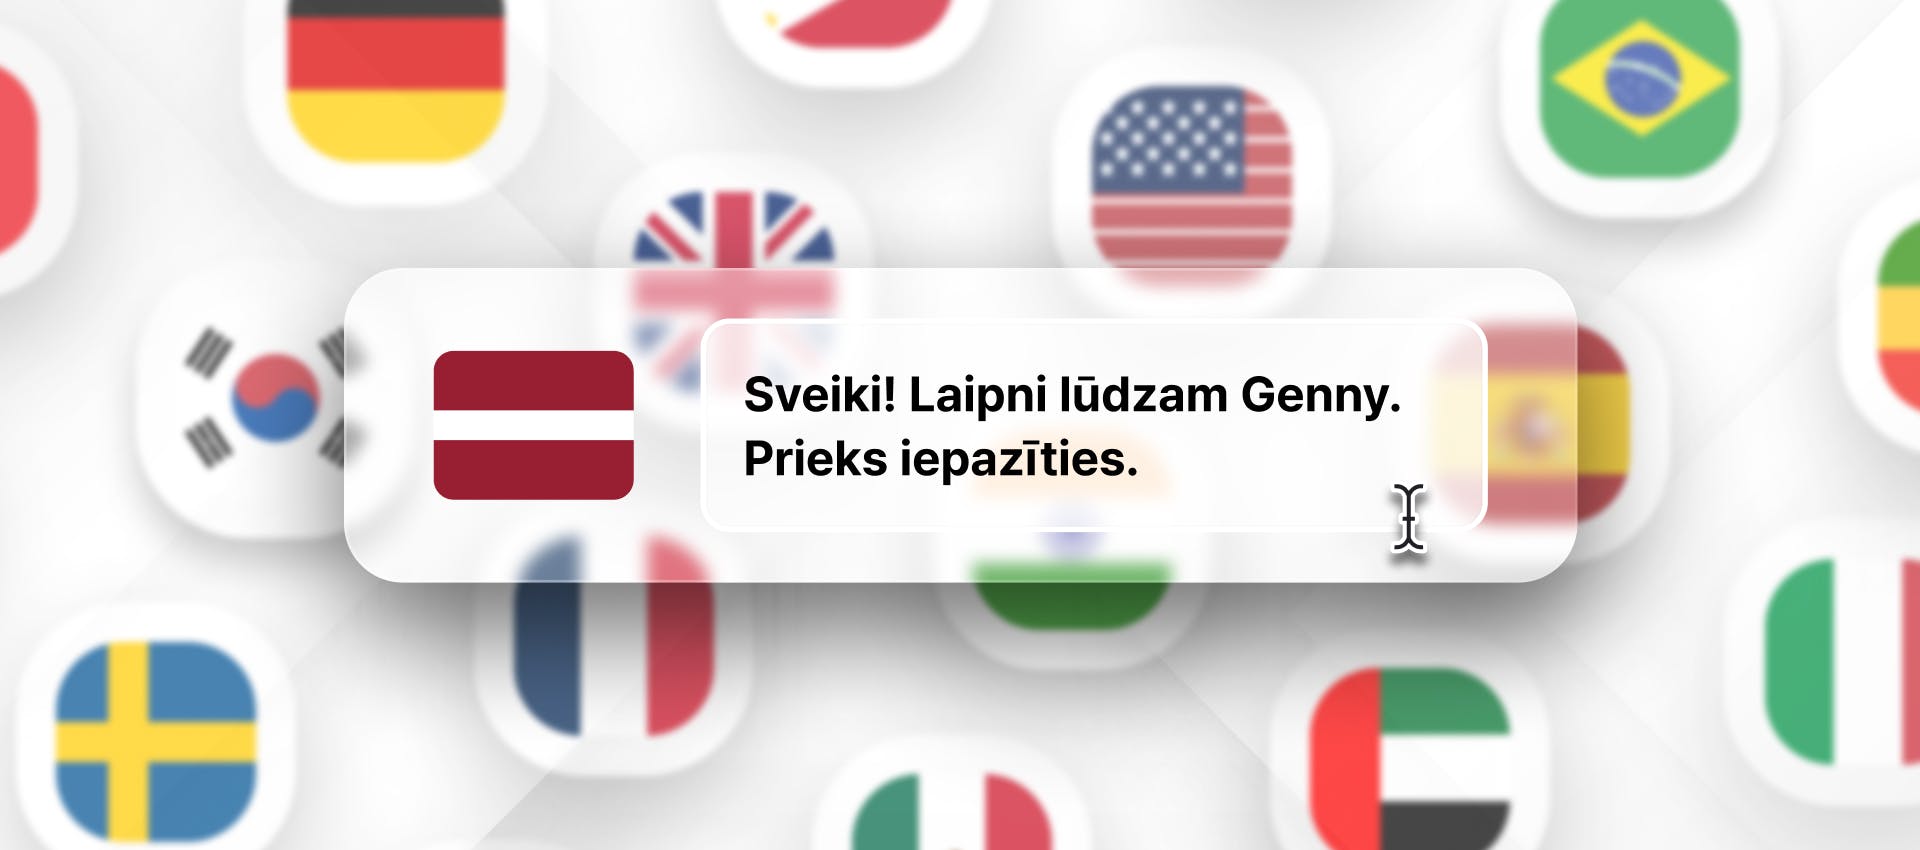 Latvian phrase for Latvian TTS generation with different flags in the background